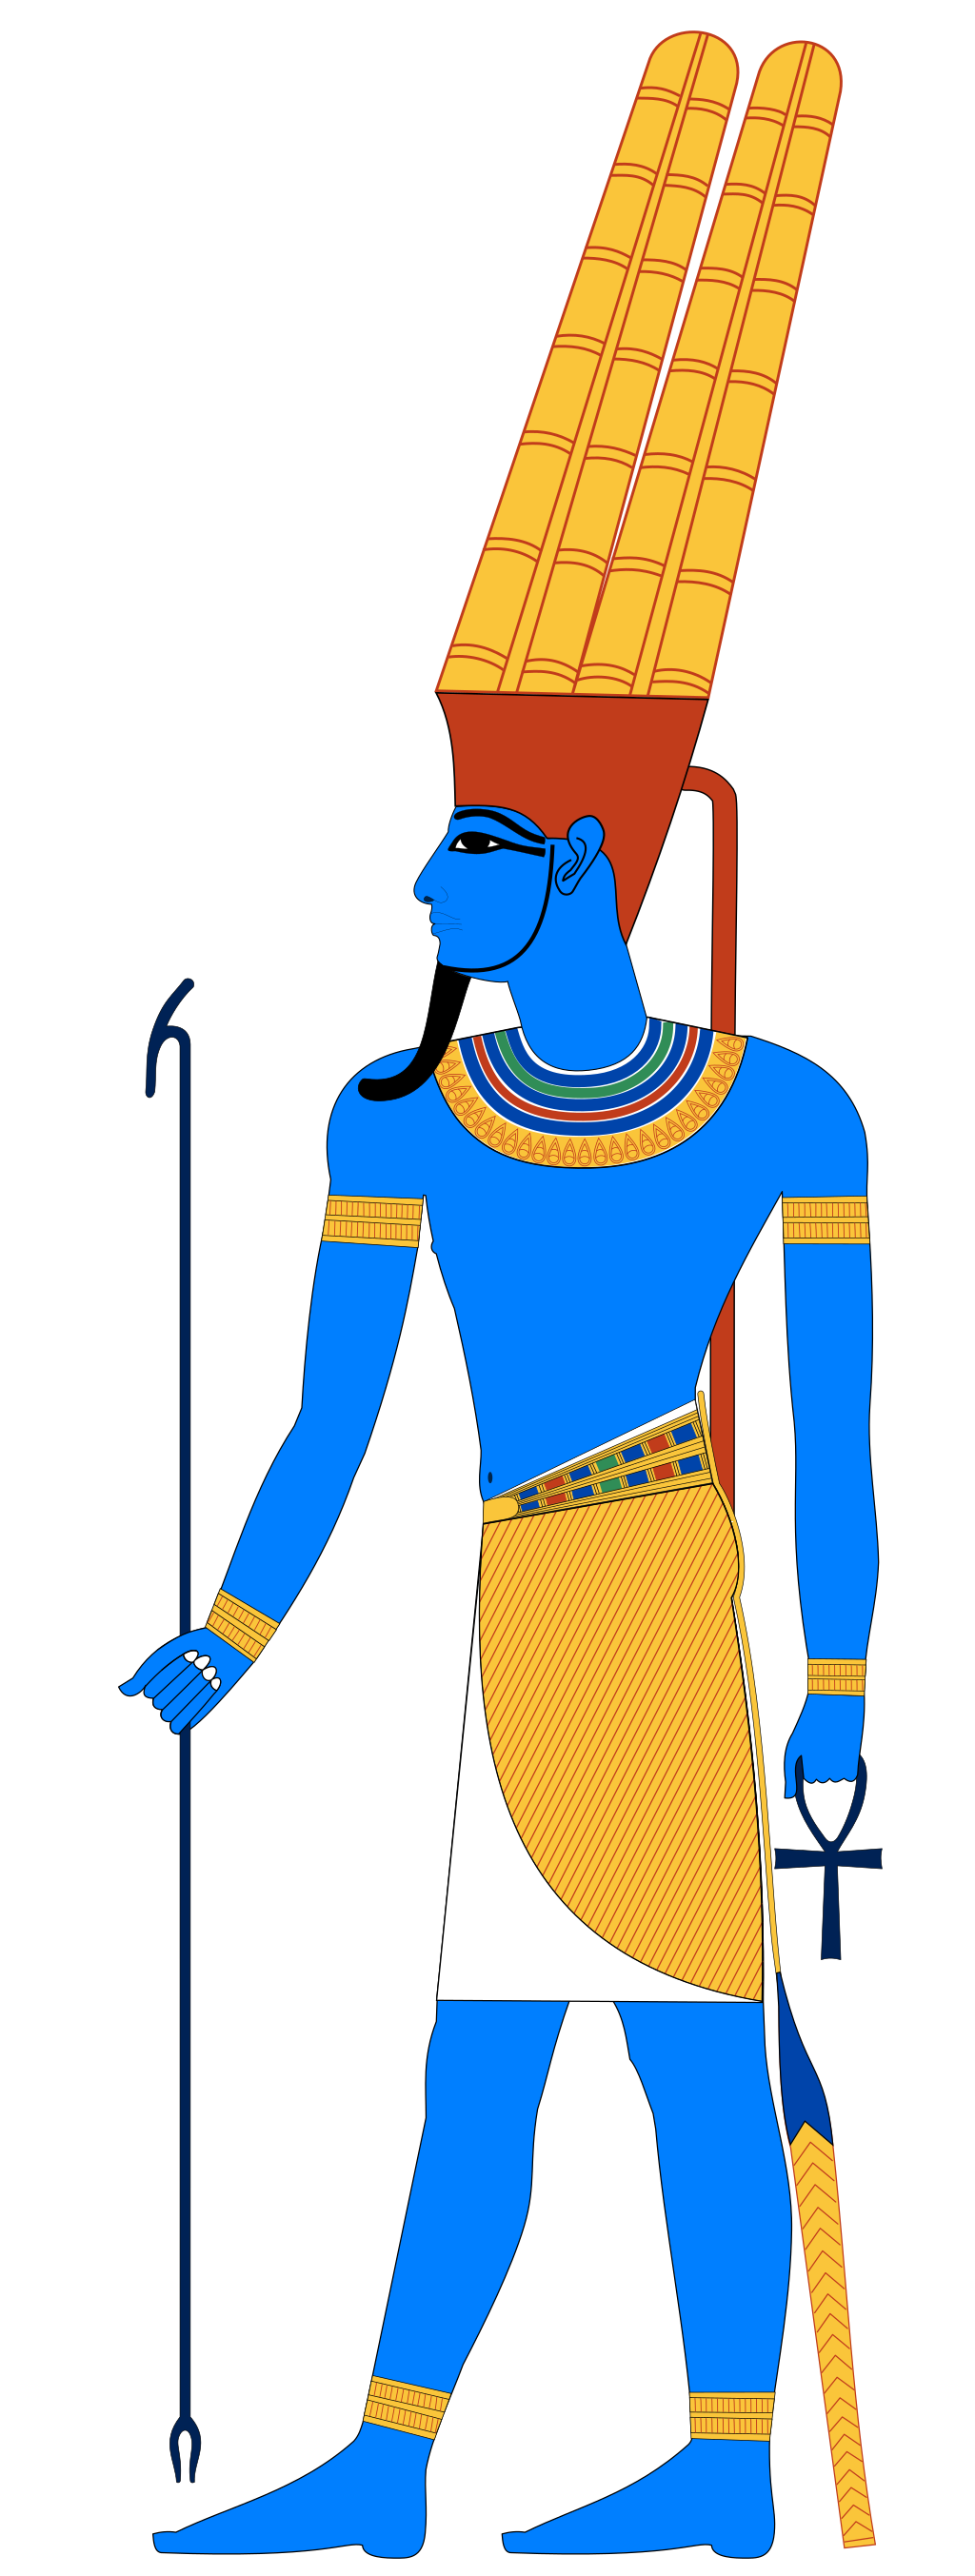 The Ancient Egyptian God Amarna on a Granite Bay Graphic Design Microsite